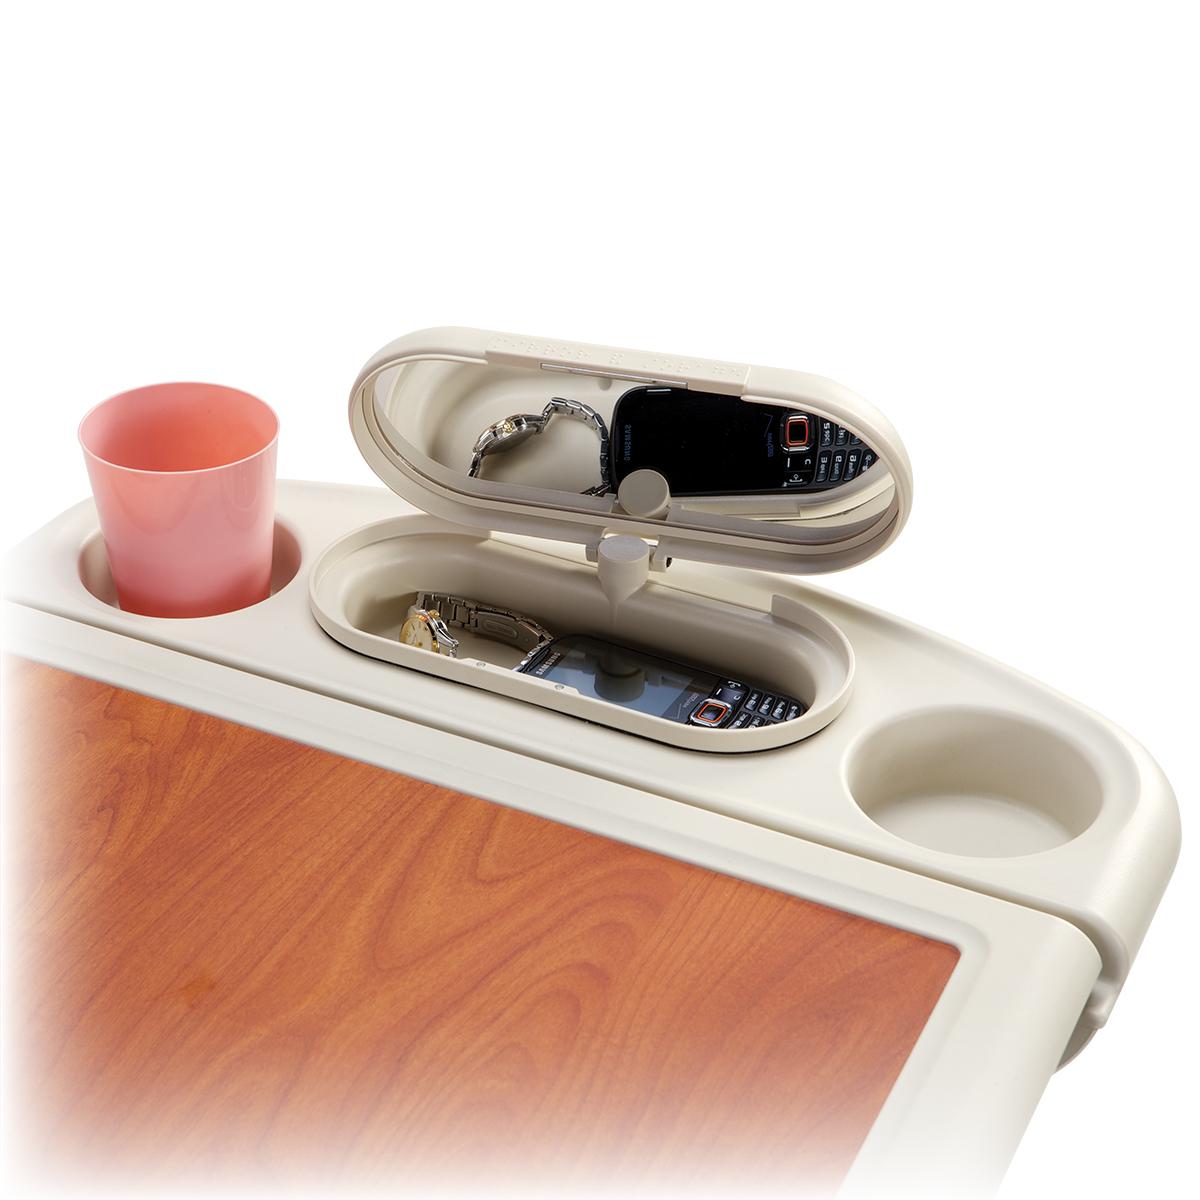 Art of Care Overbed Tables, red wood design top, close-up view of cup holder, mirror and storage